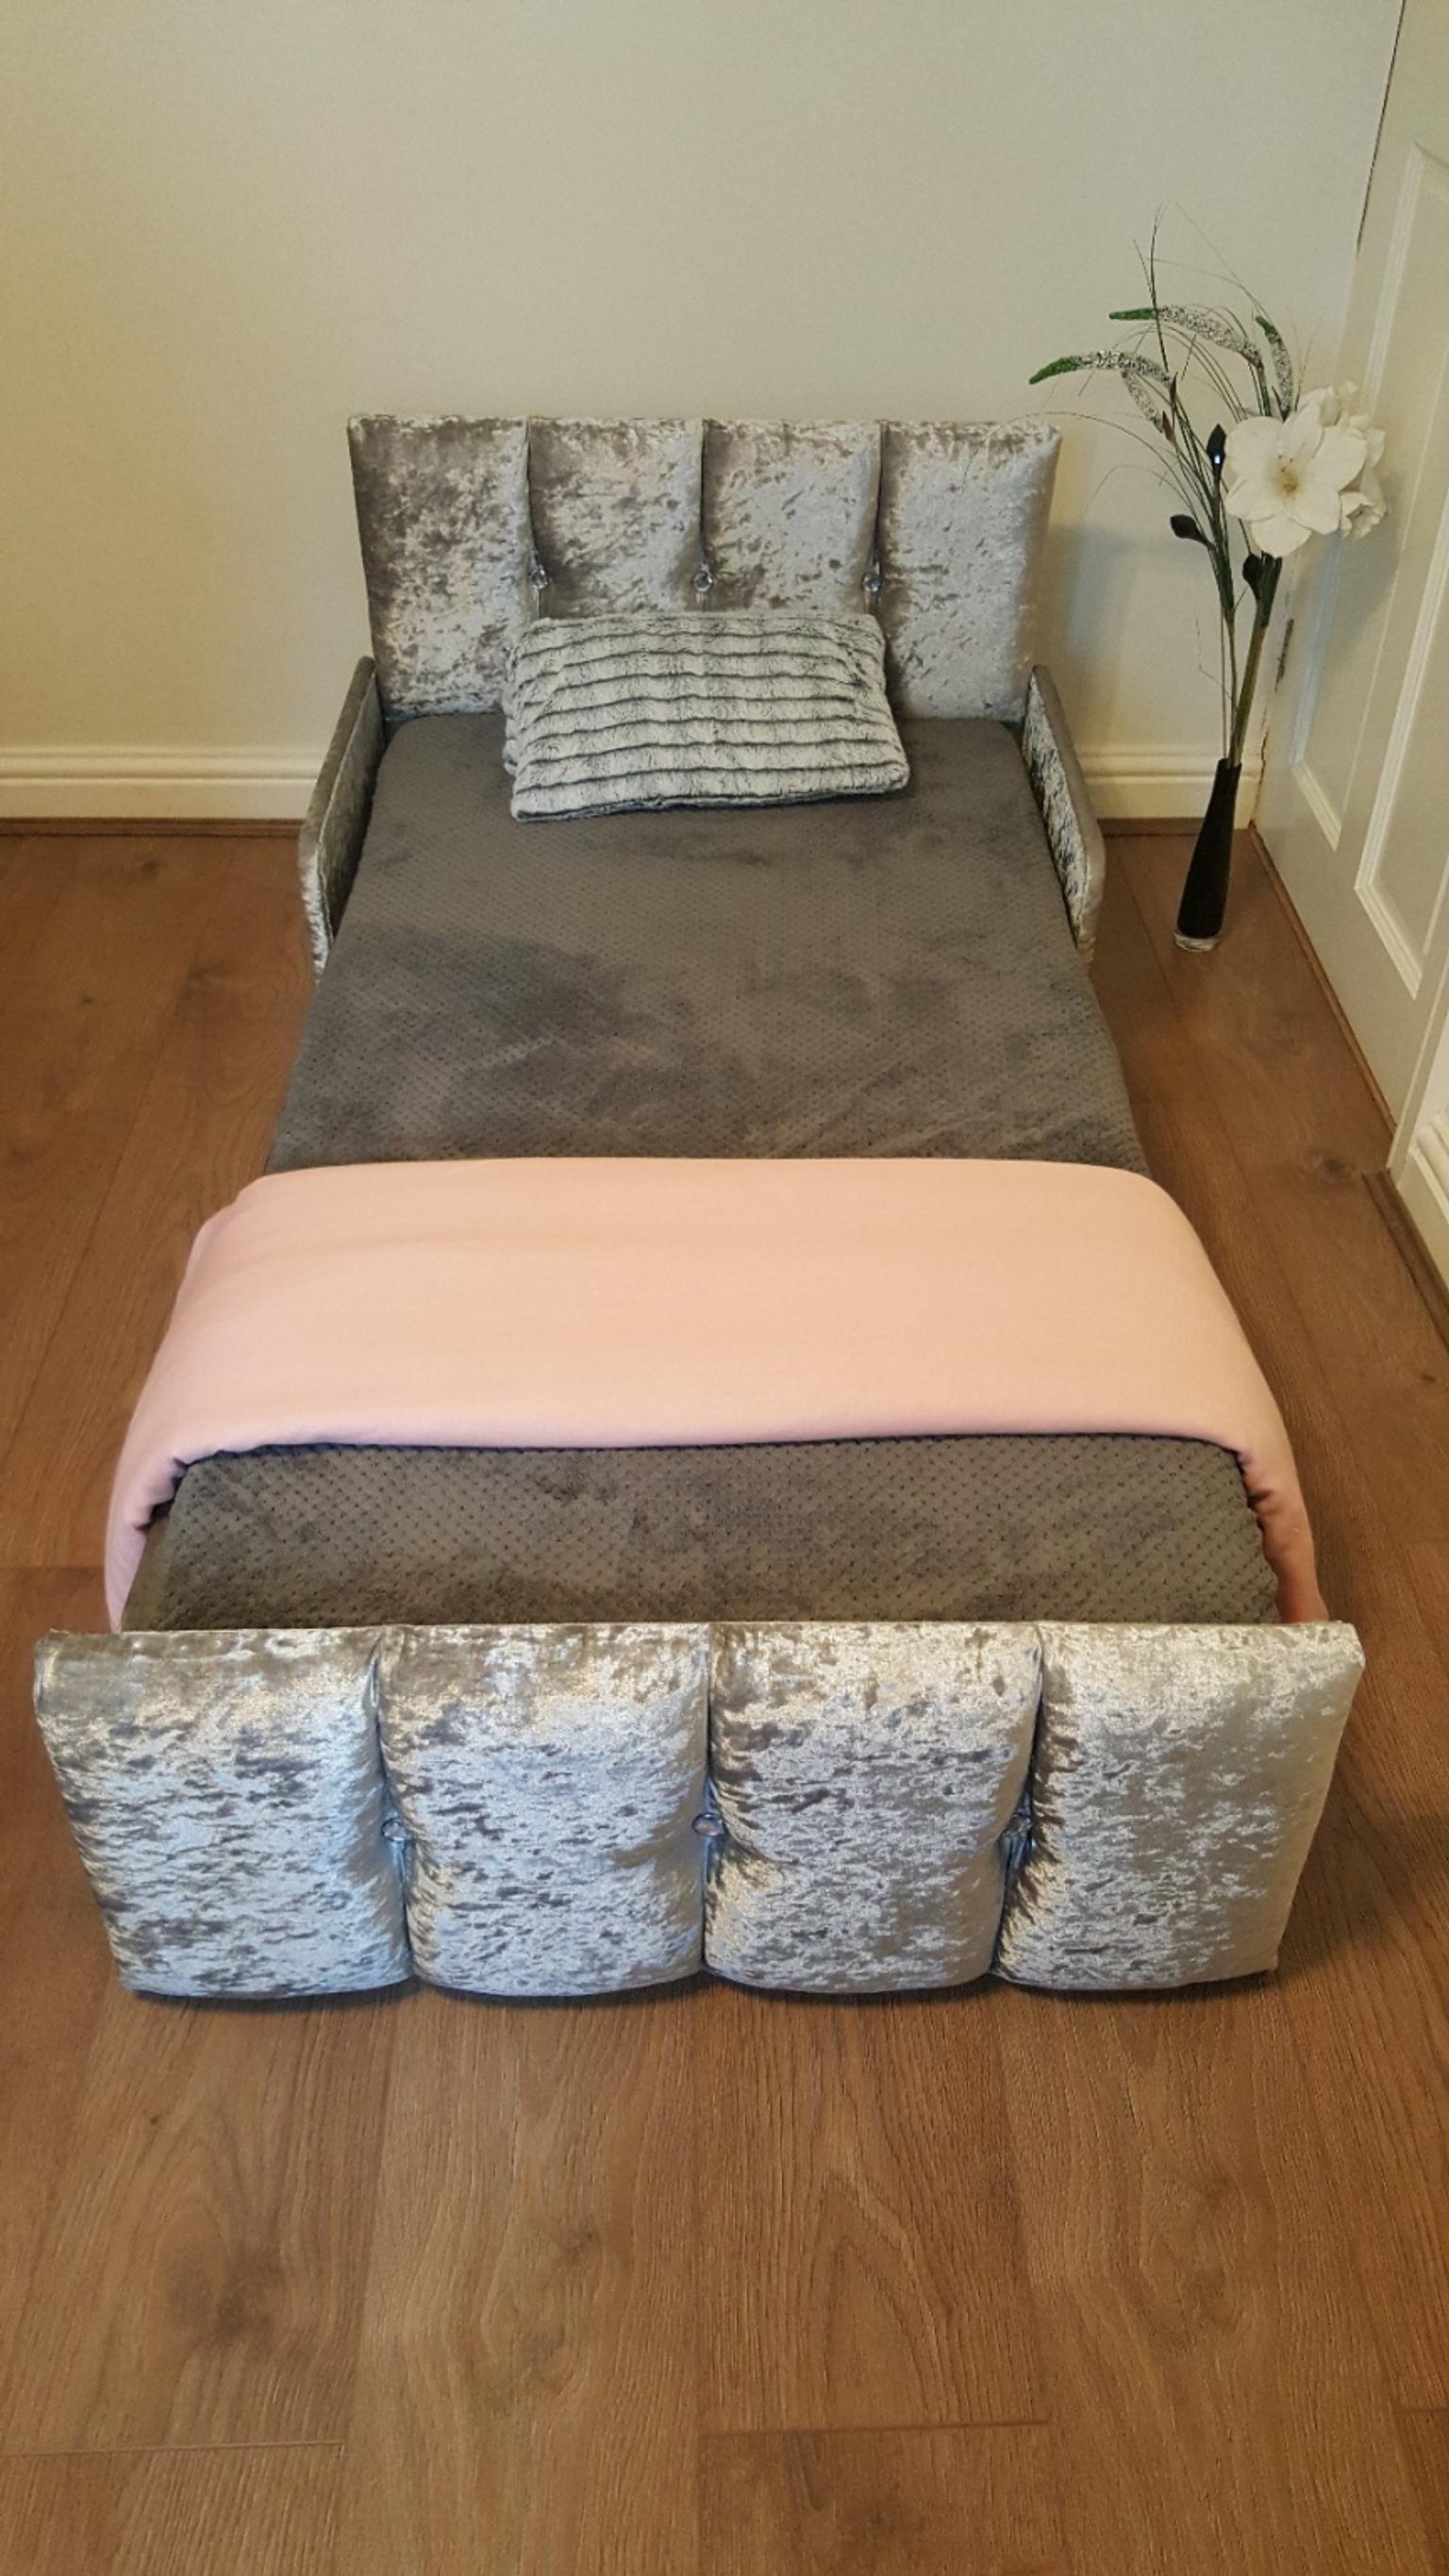 Toddler Beds In B6 Birmingham For 129 99 For Sale Shpock